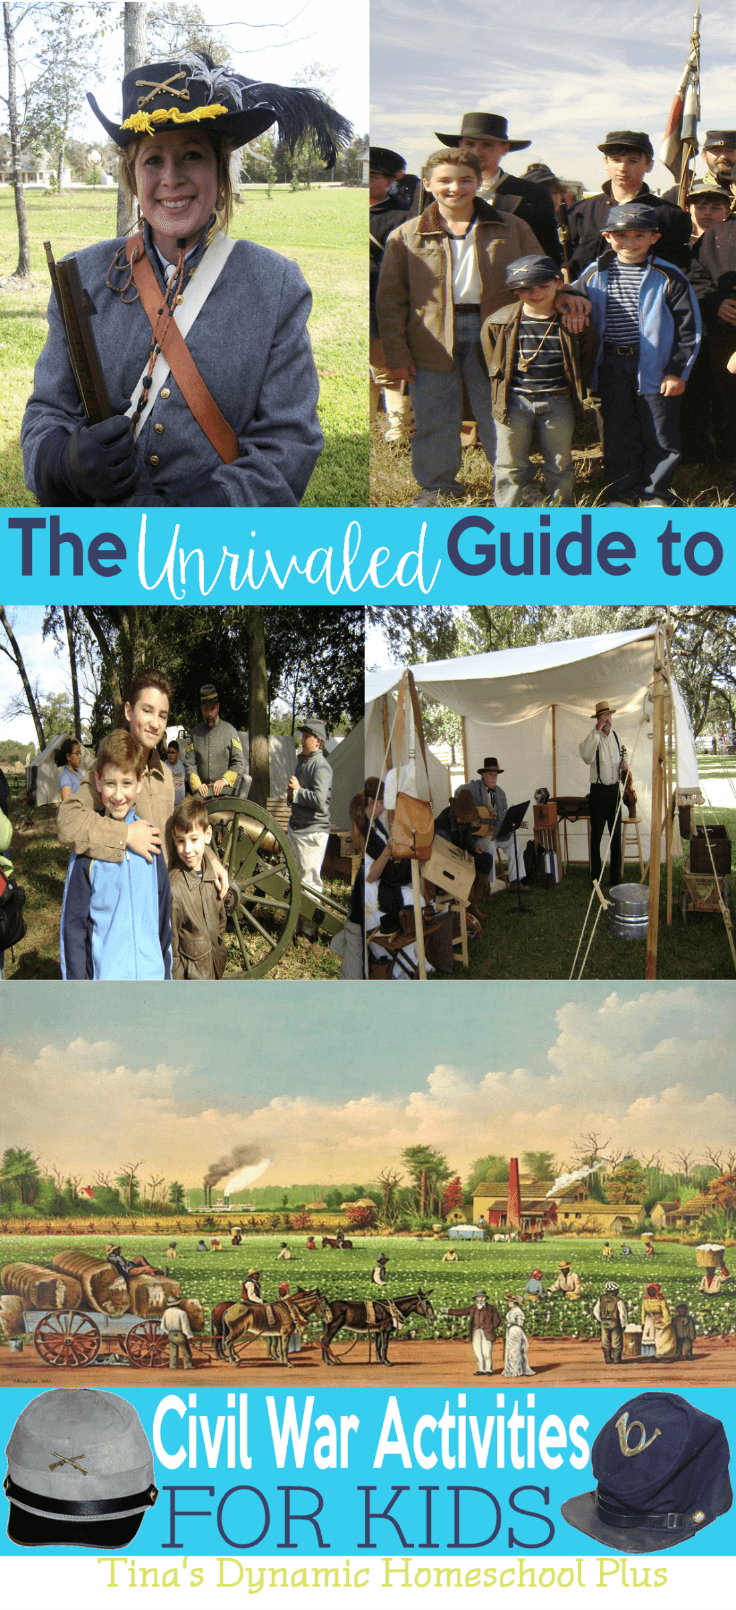 The Unrivaled Guide to Civil War Activities for Kids @ Tina's Dynamic Homeschool Plus